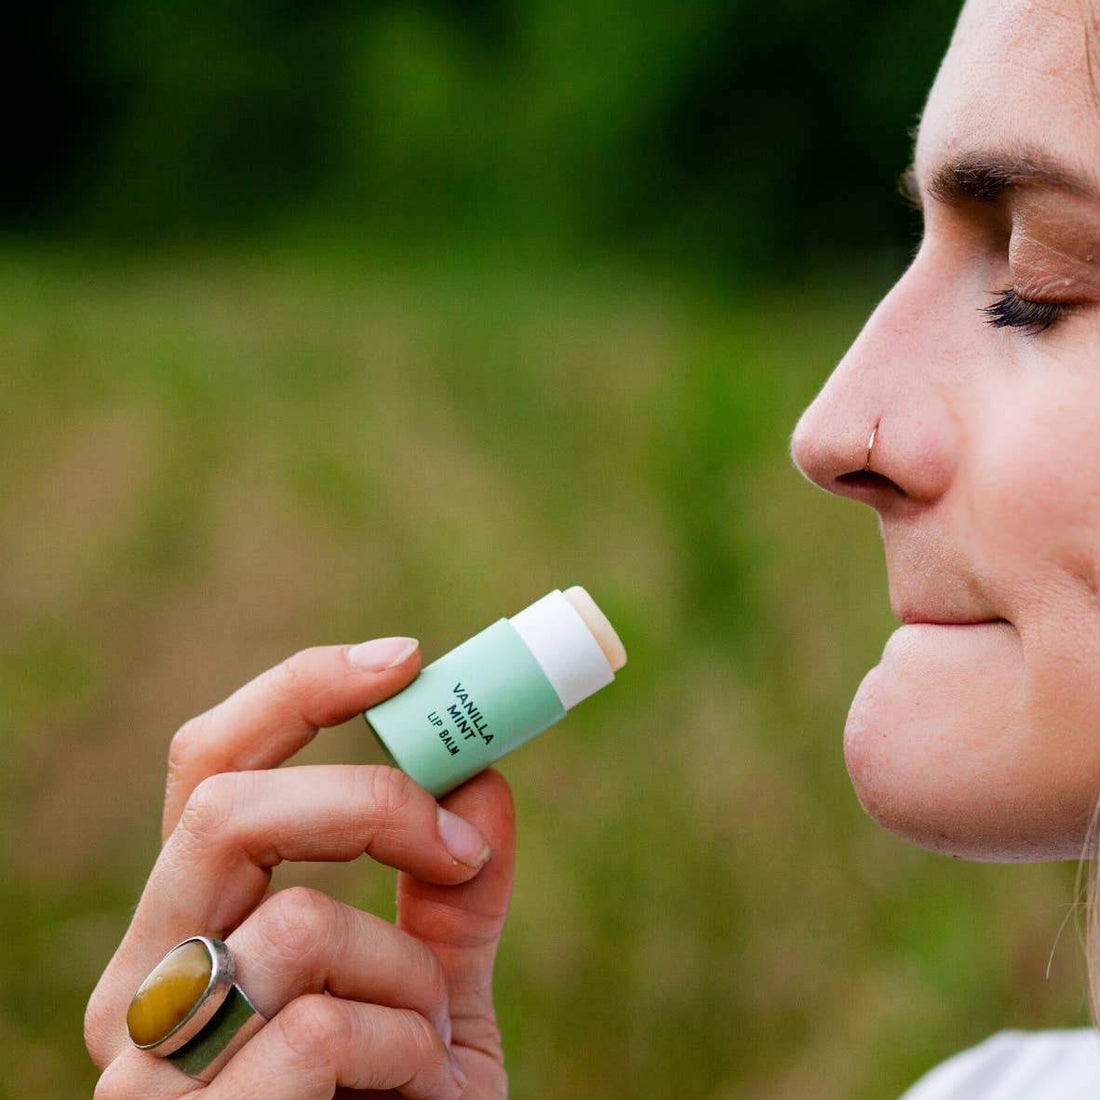 Good Flower Farm Lip Balm In Vanilla Mint With 100% Biodegradable Cardboard Tube, Being Applied By Woman With  Closed Eyes.